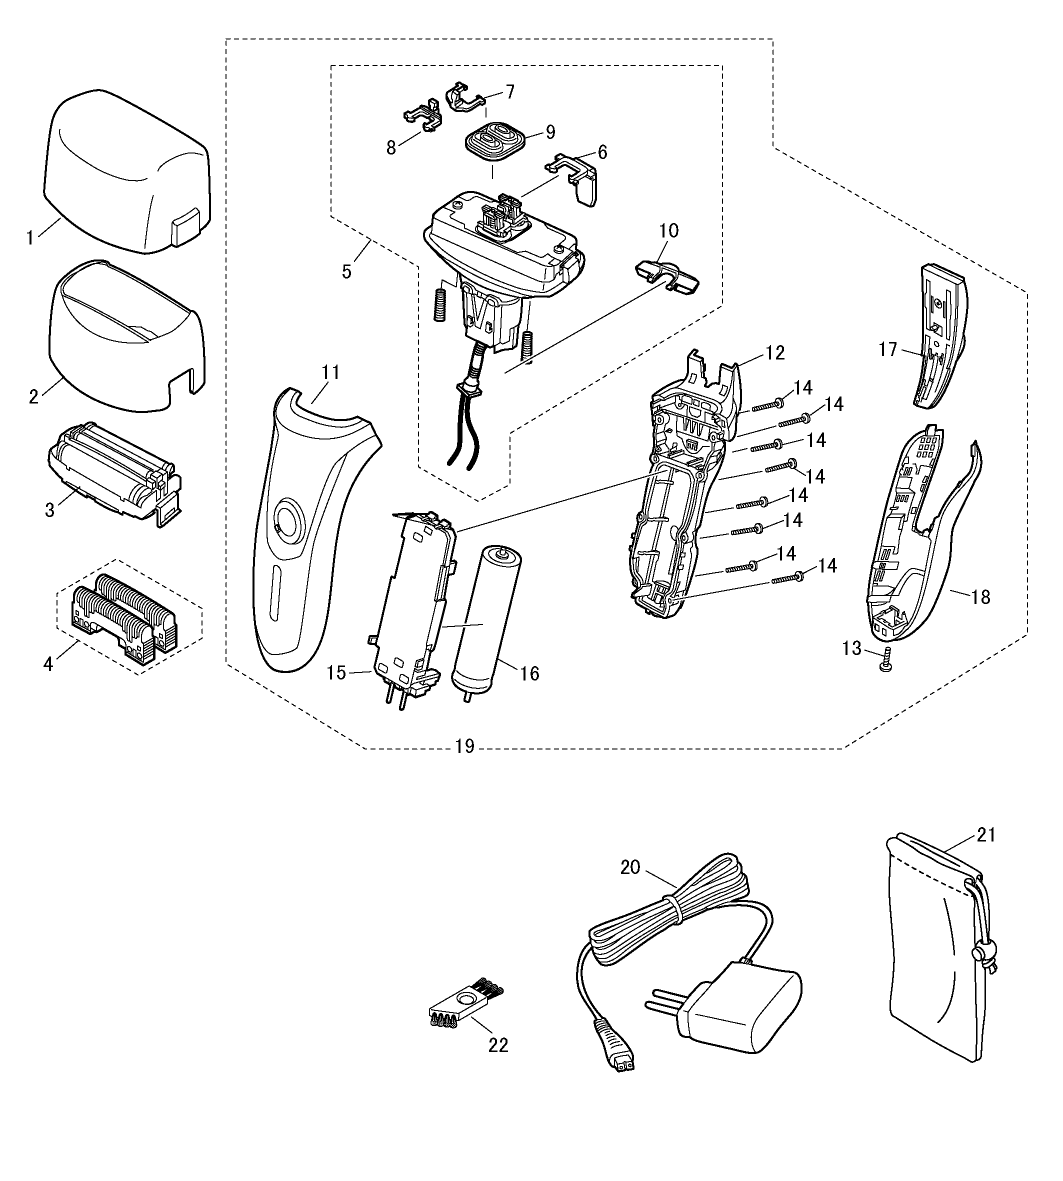 ES-RF31: Exploded View